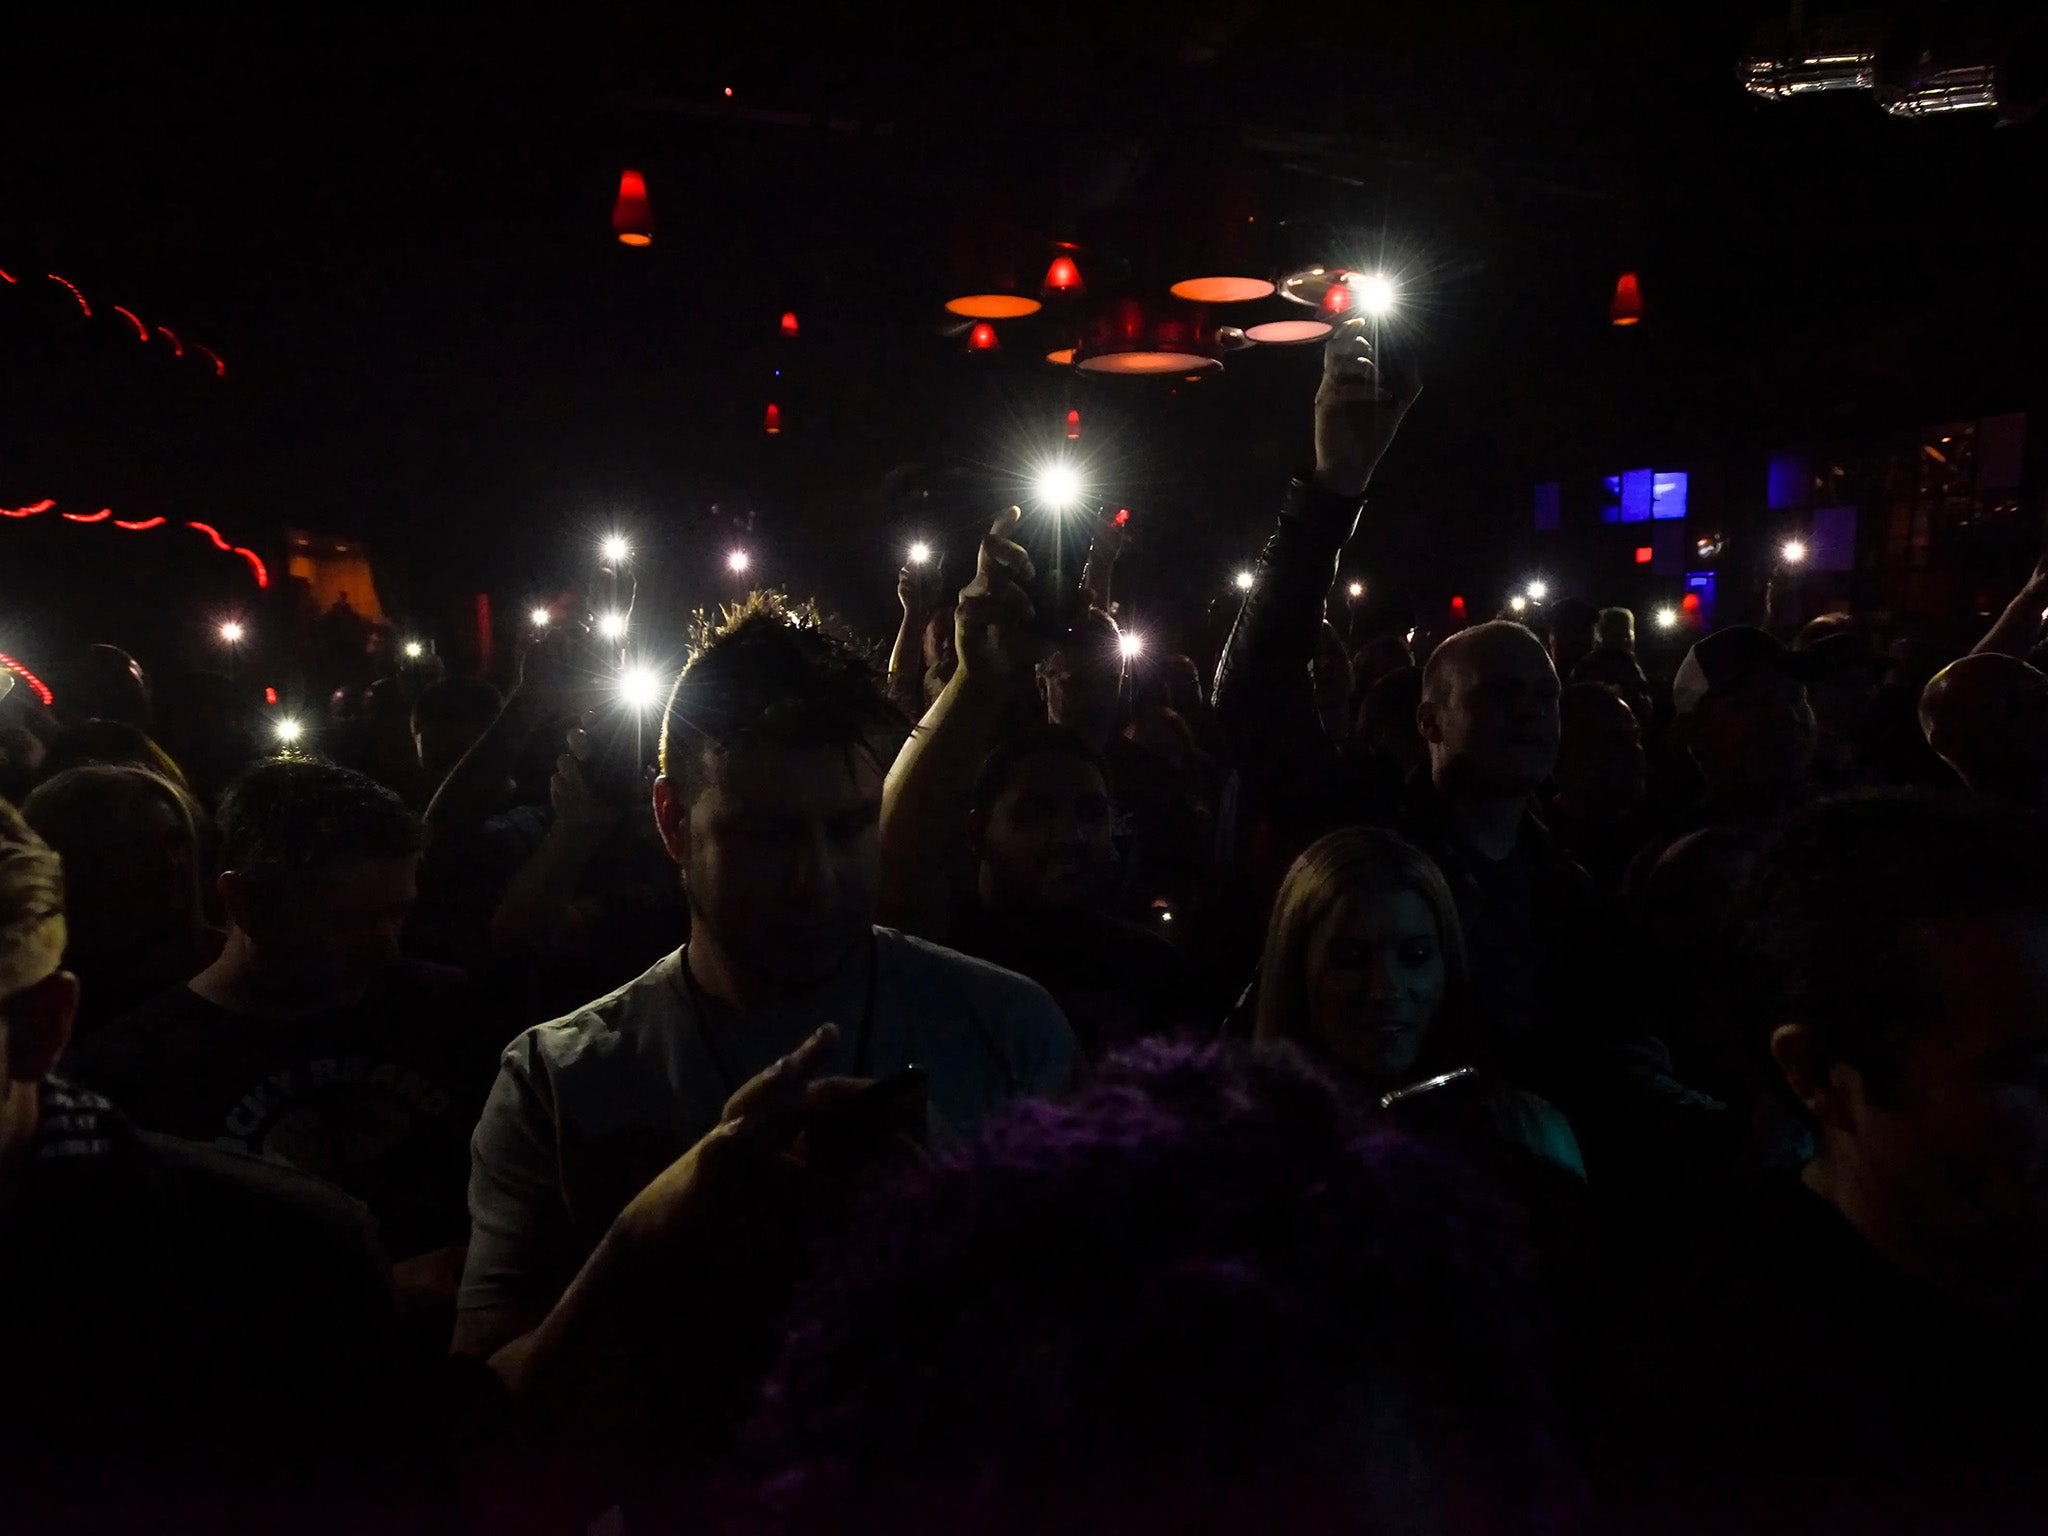 Phones should be switched off at concerts, not just put on mute